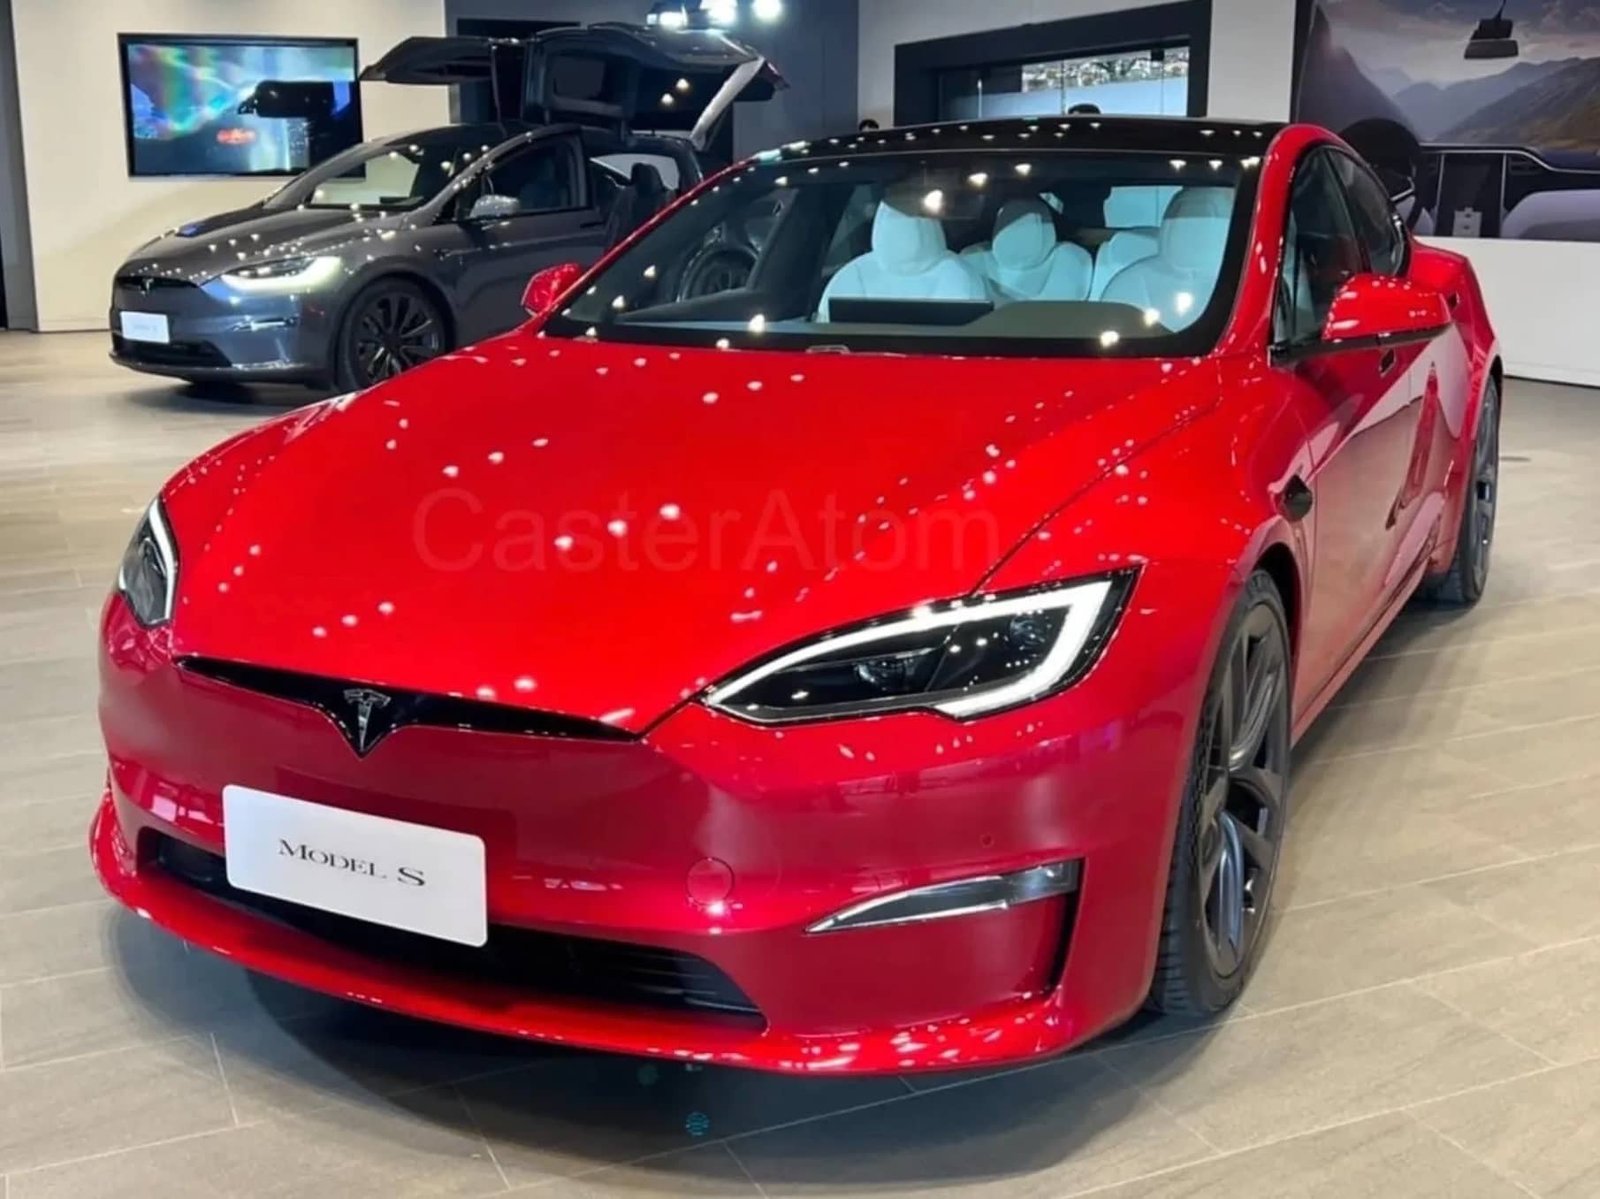 Singapore: Tesla expands discounts with price slashes in Europe, Singapore, and Israel